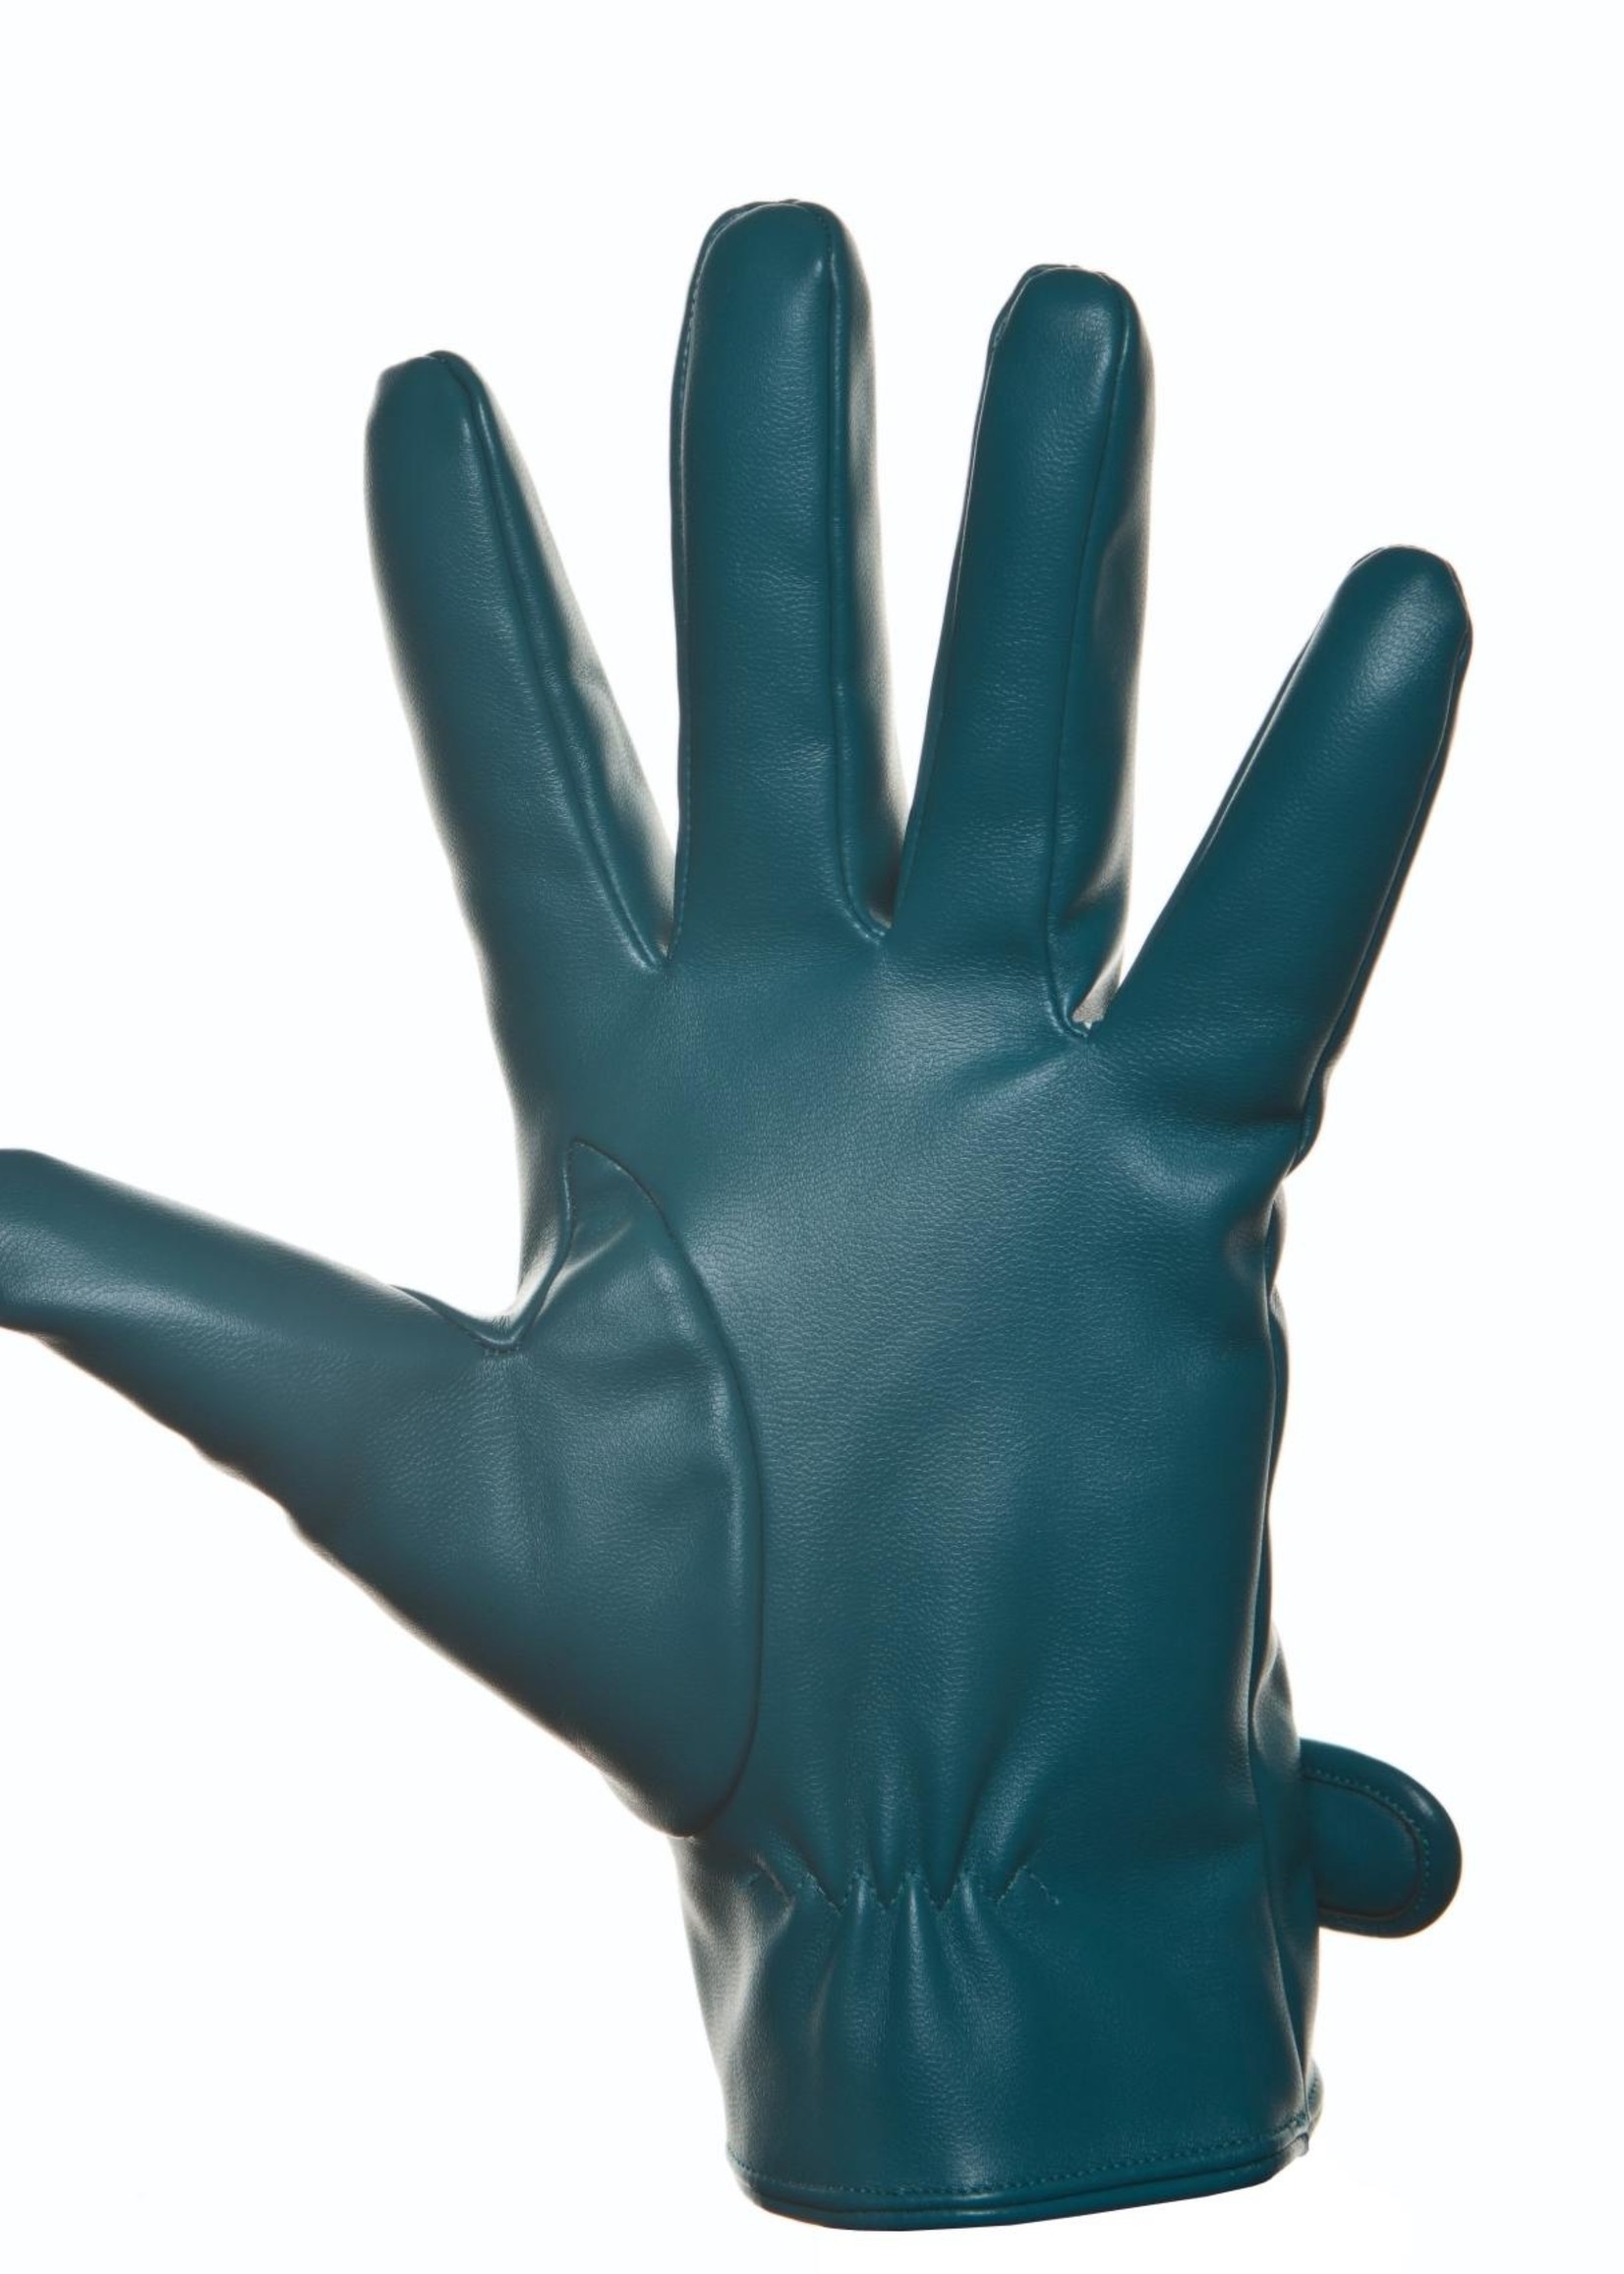 Blue leather gloves